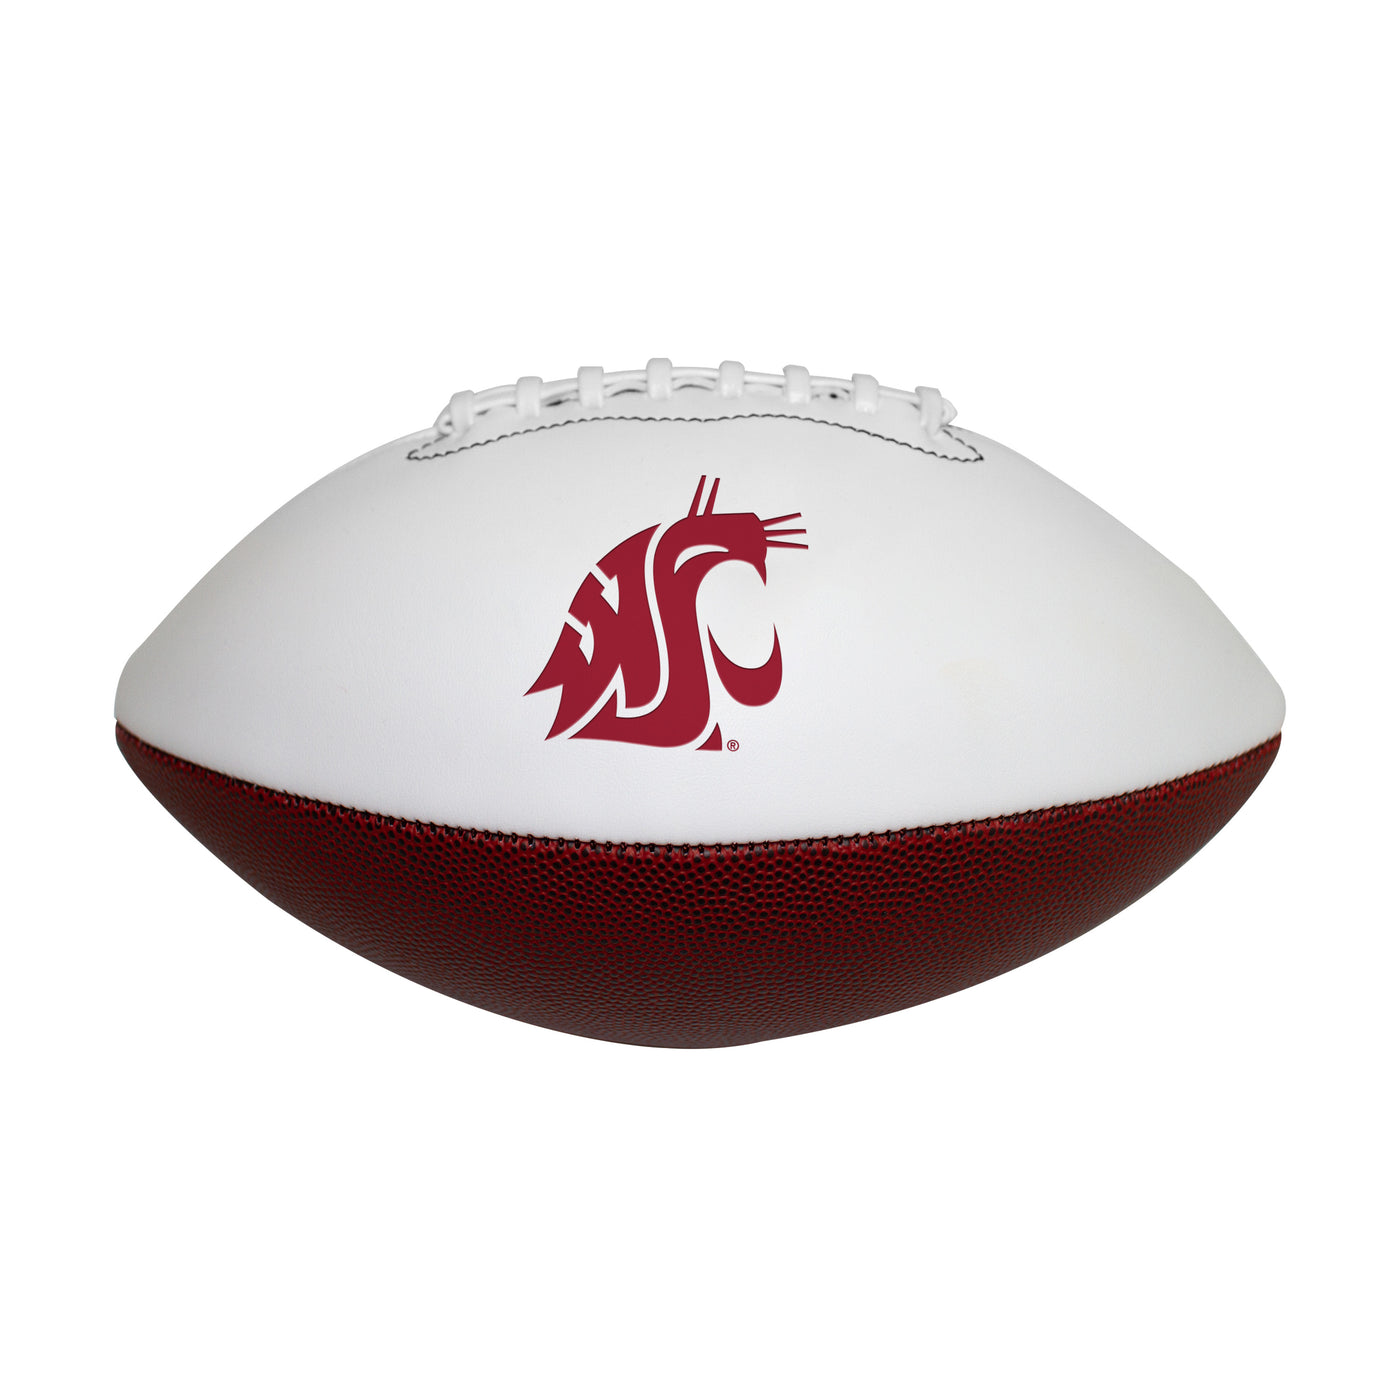 WA State Official-Size Autograph Football